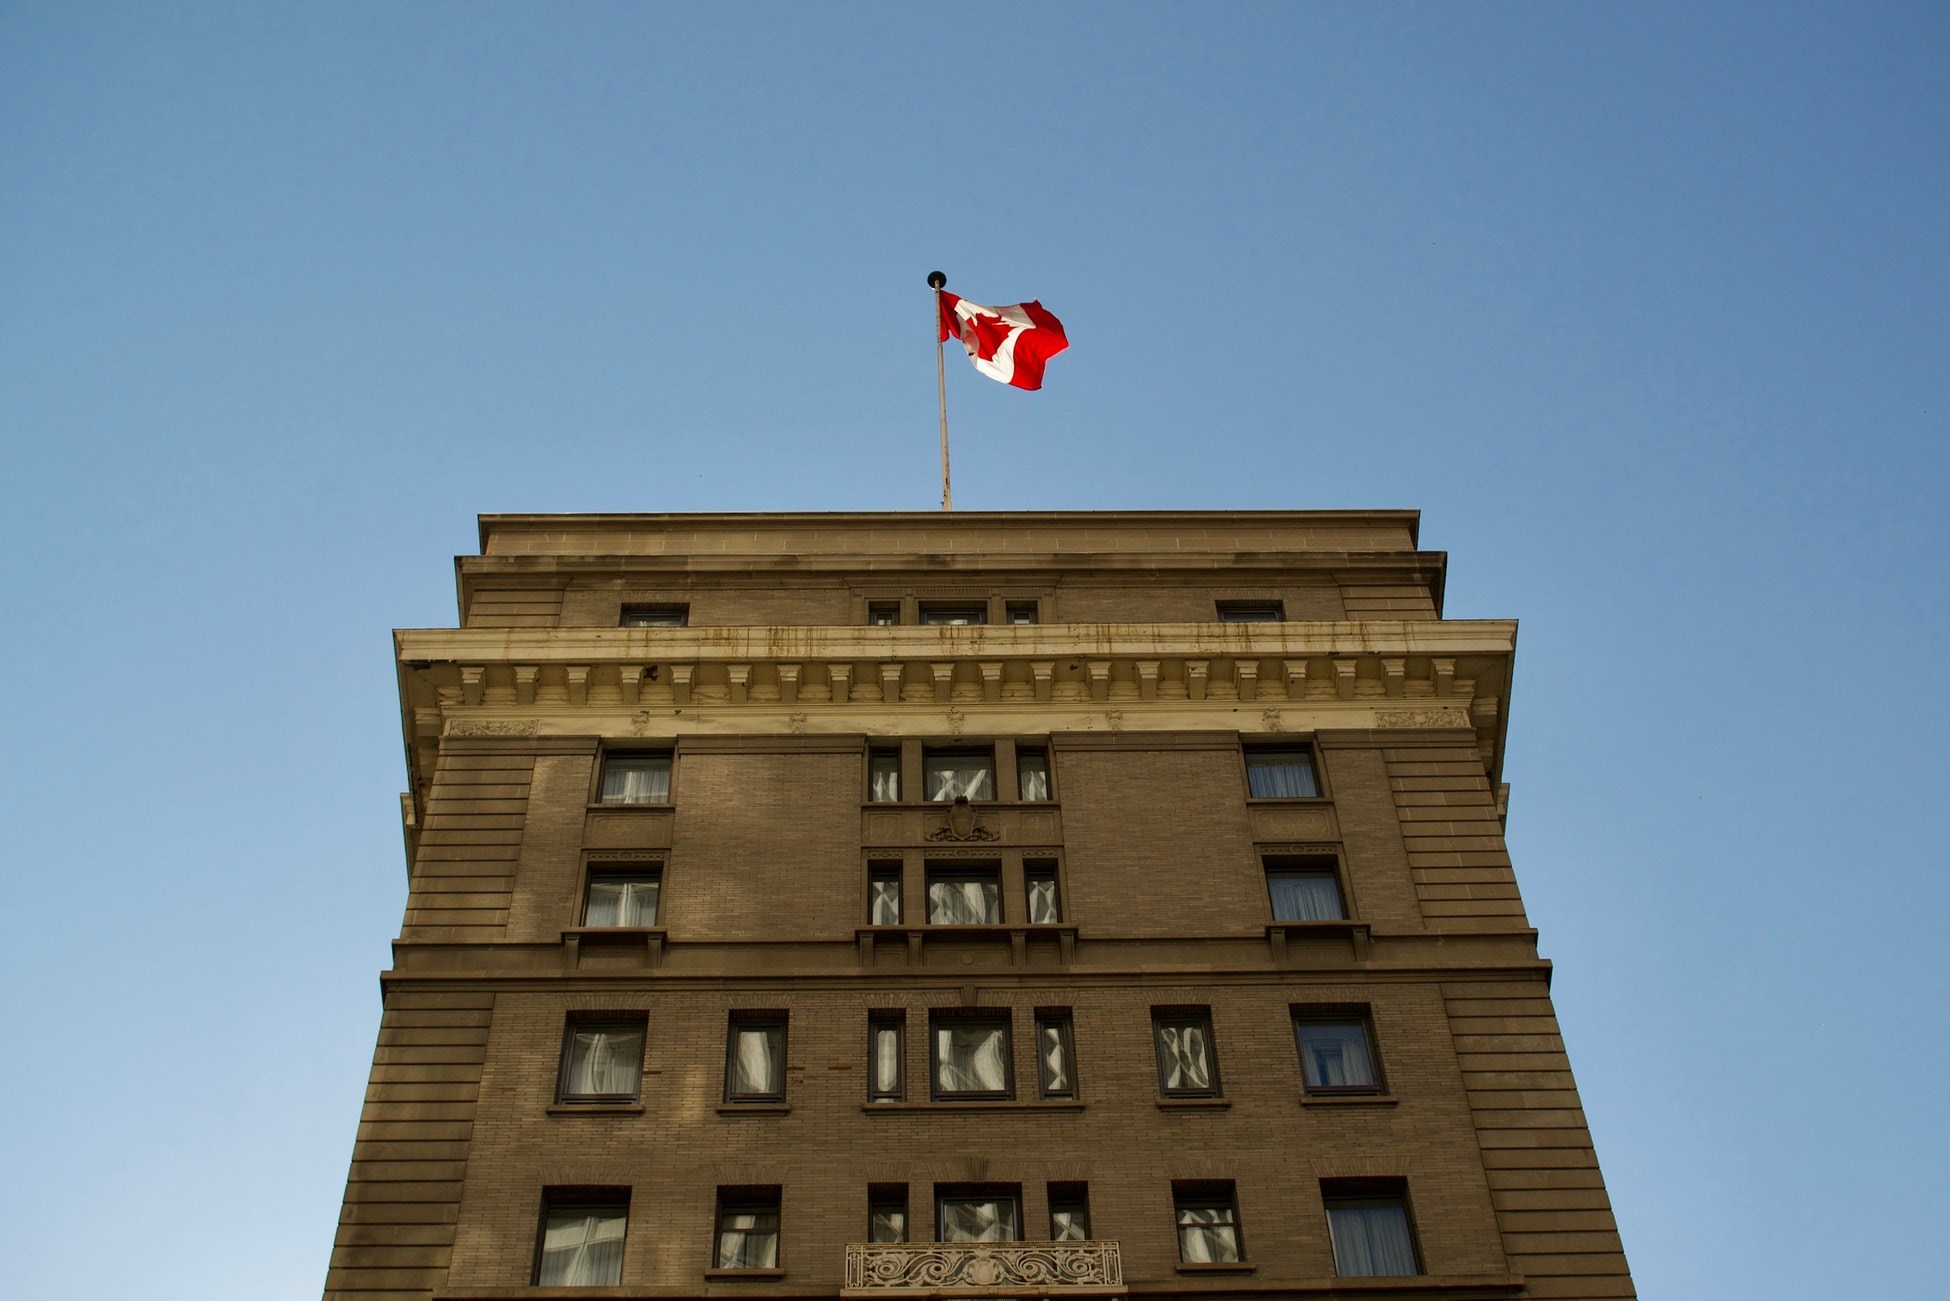 Building with Canadian flag on top